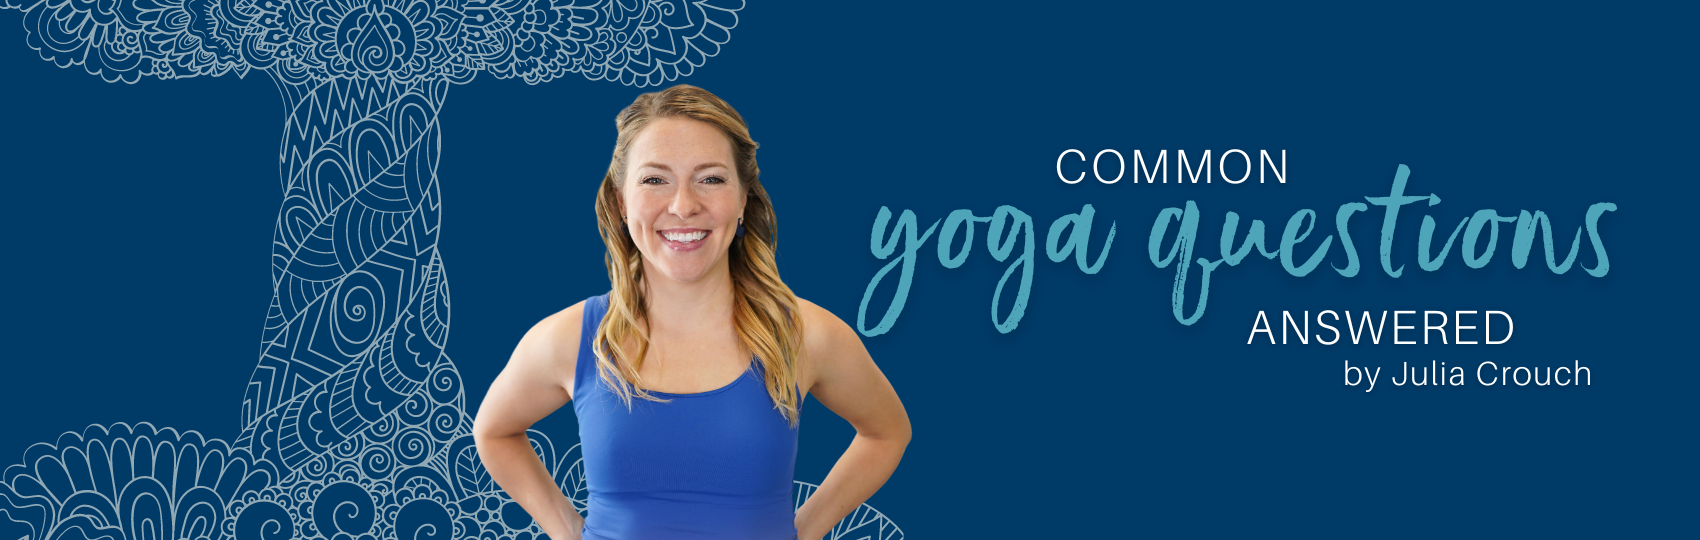 Common Yoga Questions Blog Banner